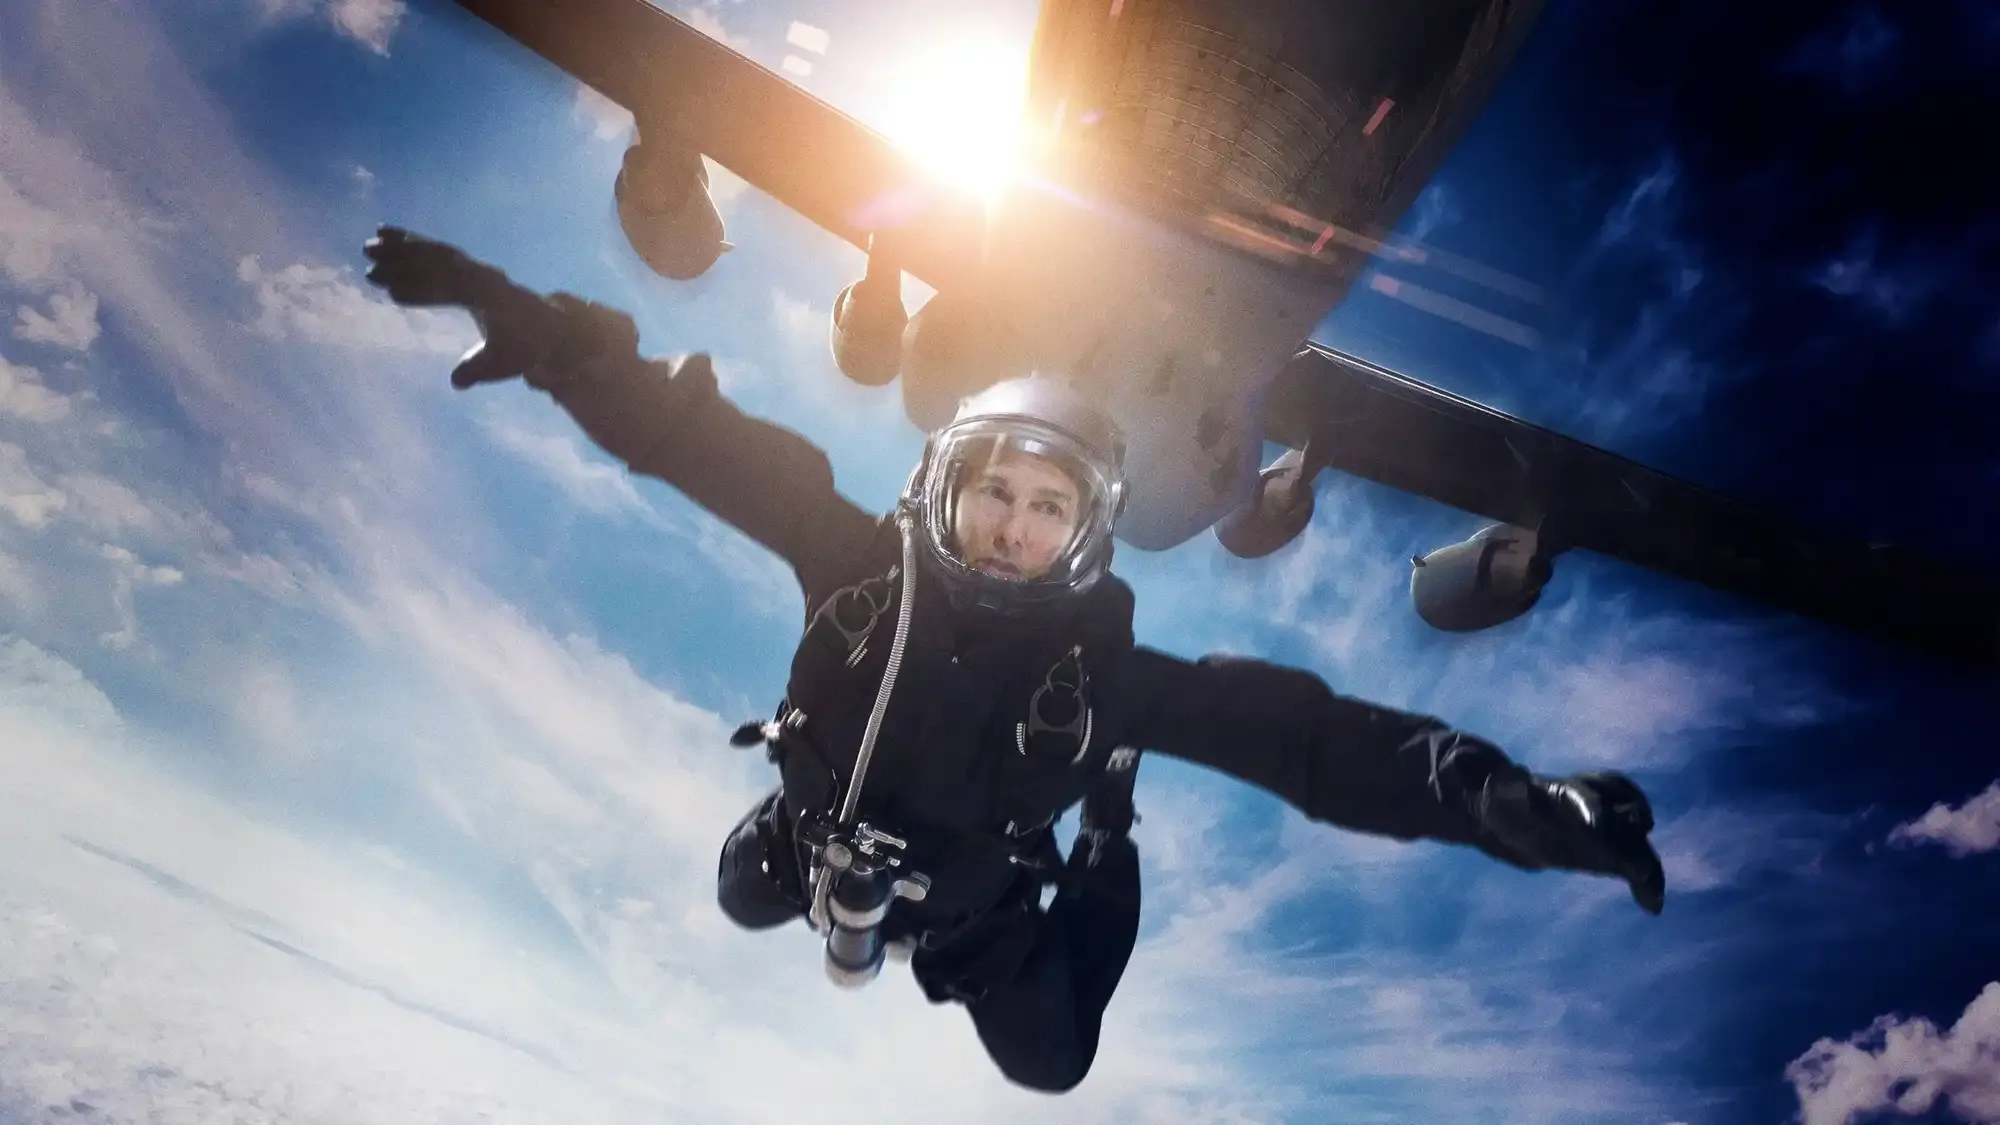 Mission: Impossible - Fallout movie review